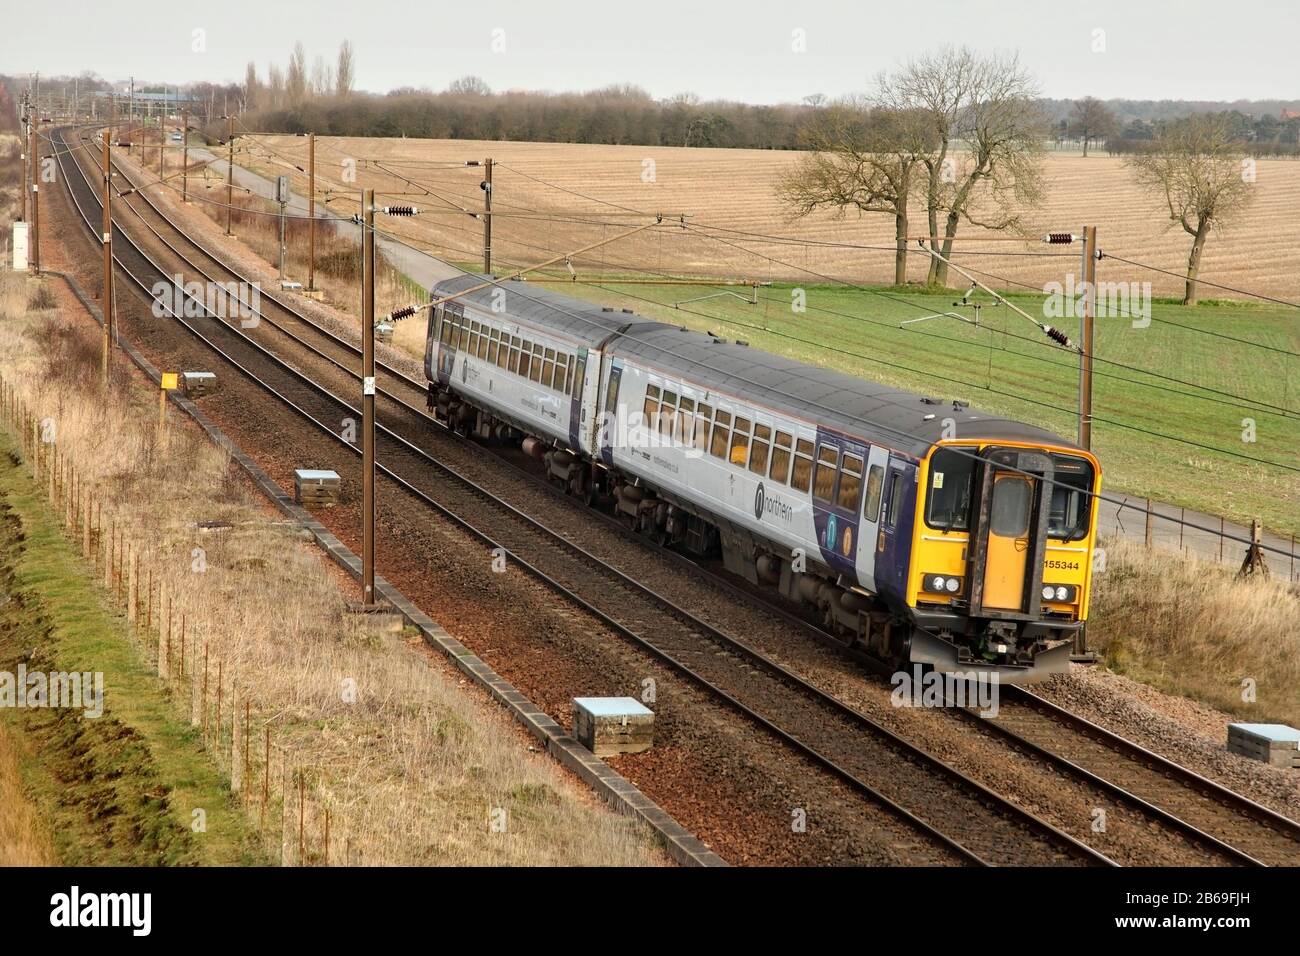 Northern Rail class 155 'Sprinter' diesel multiple unit no. 155344 at Colton junction, south of York, UK. Stock Photo